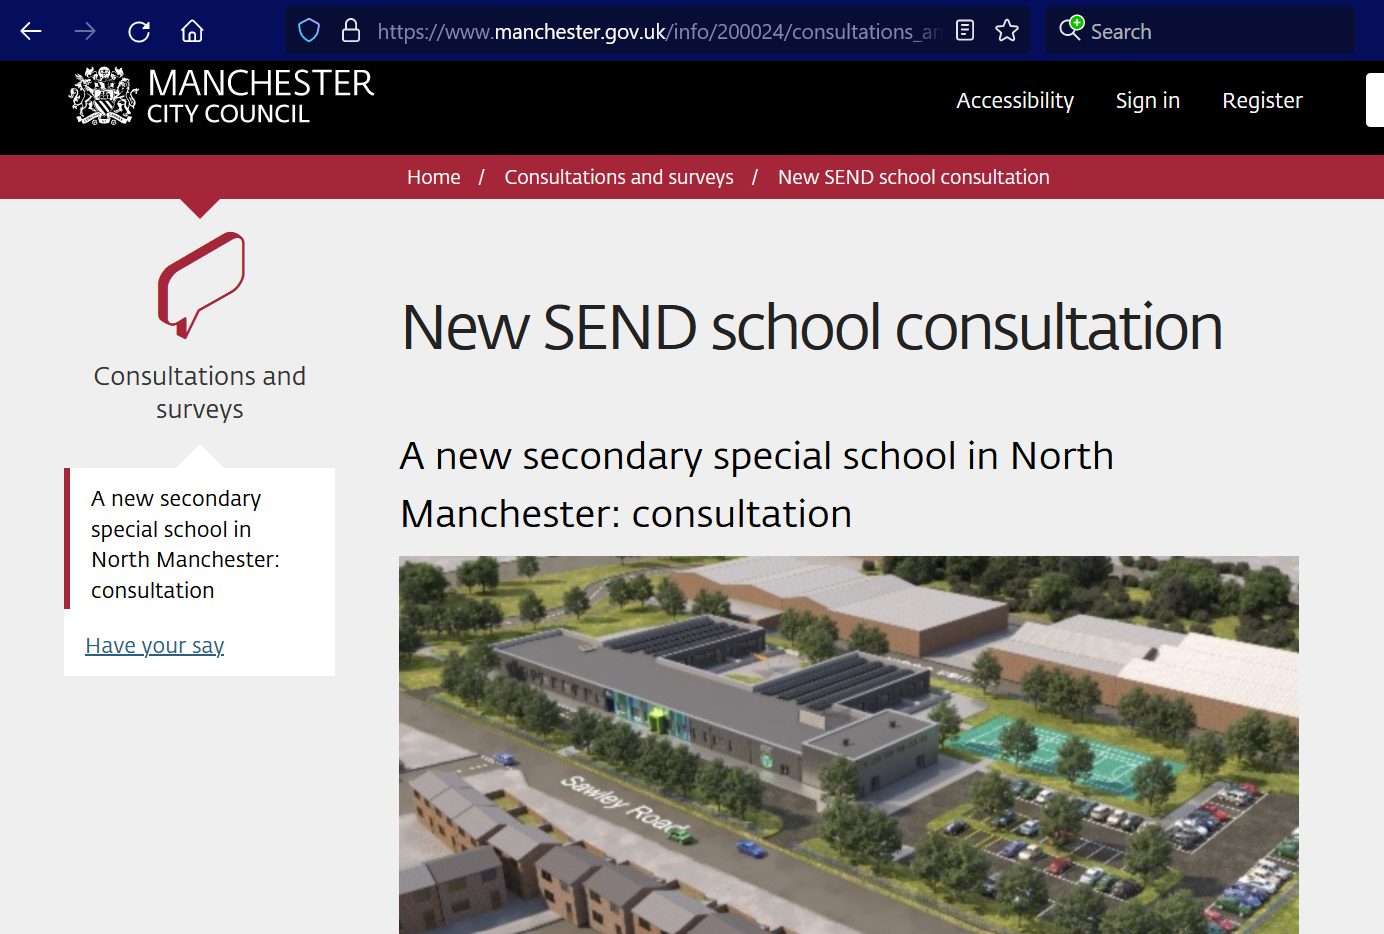 The photo is a screenshot of the page on Manchester City Council's website about the consultation around the new specialist secondary school that being planned to be built in North Manchester.